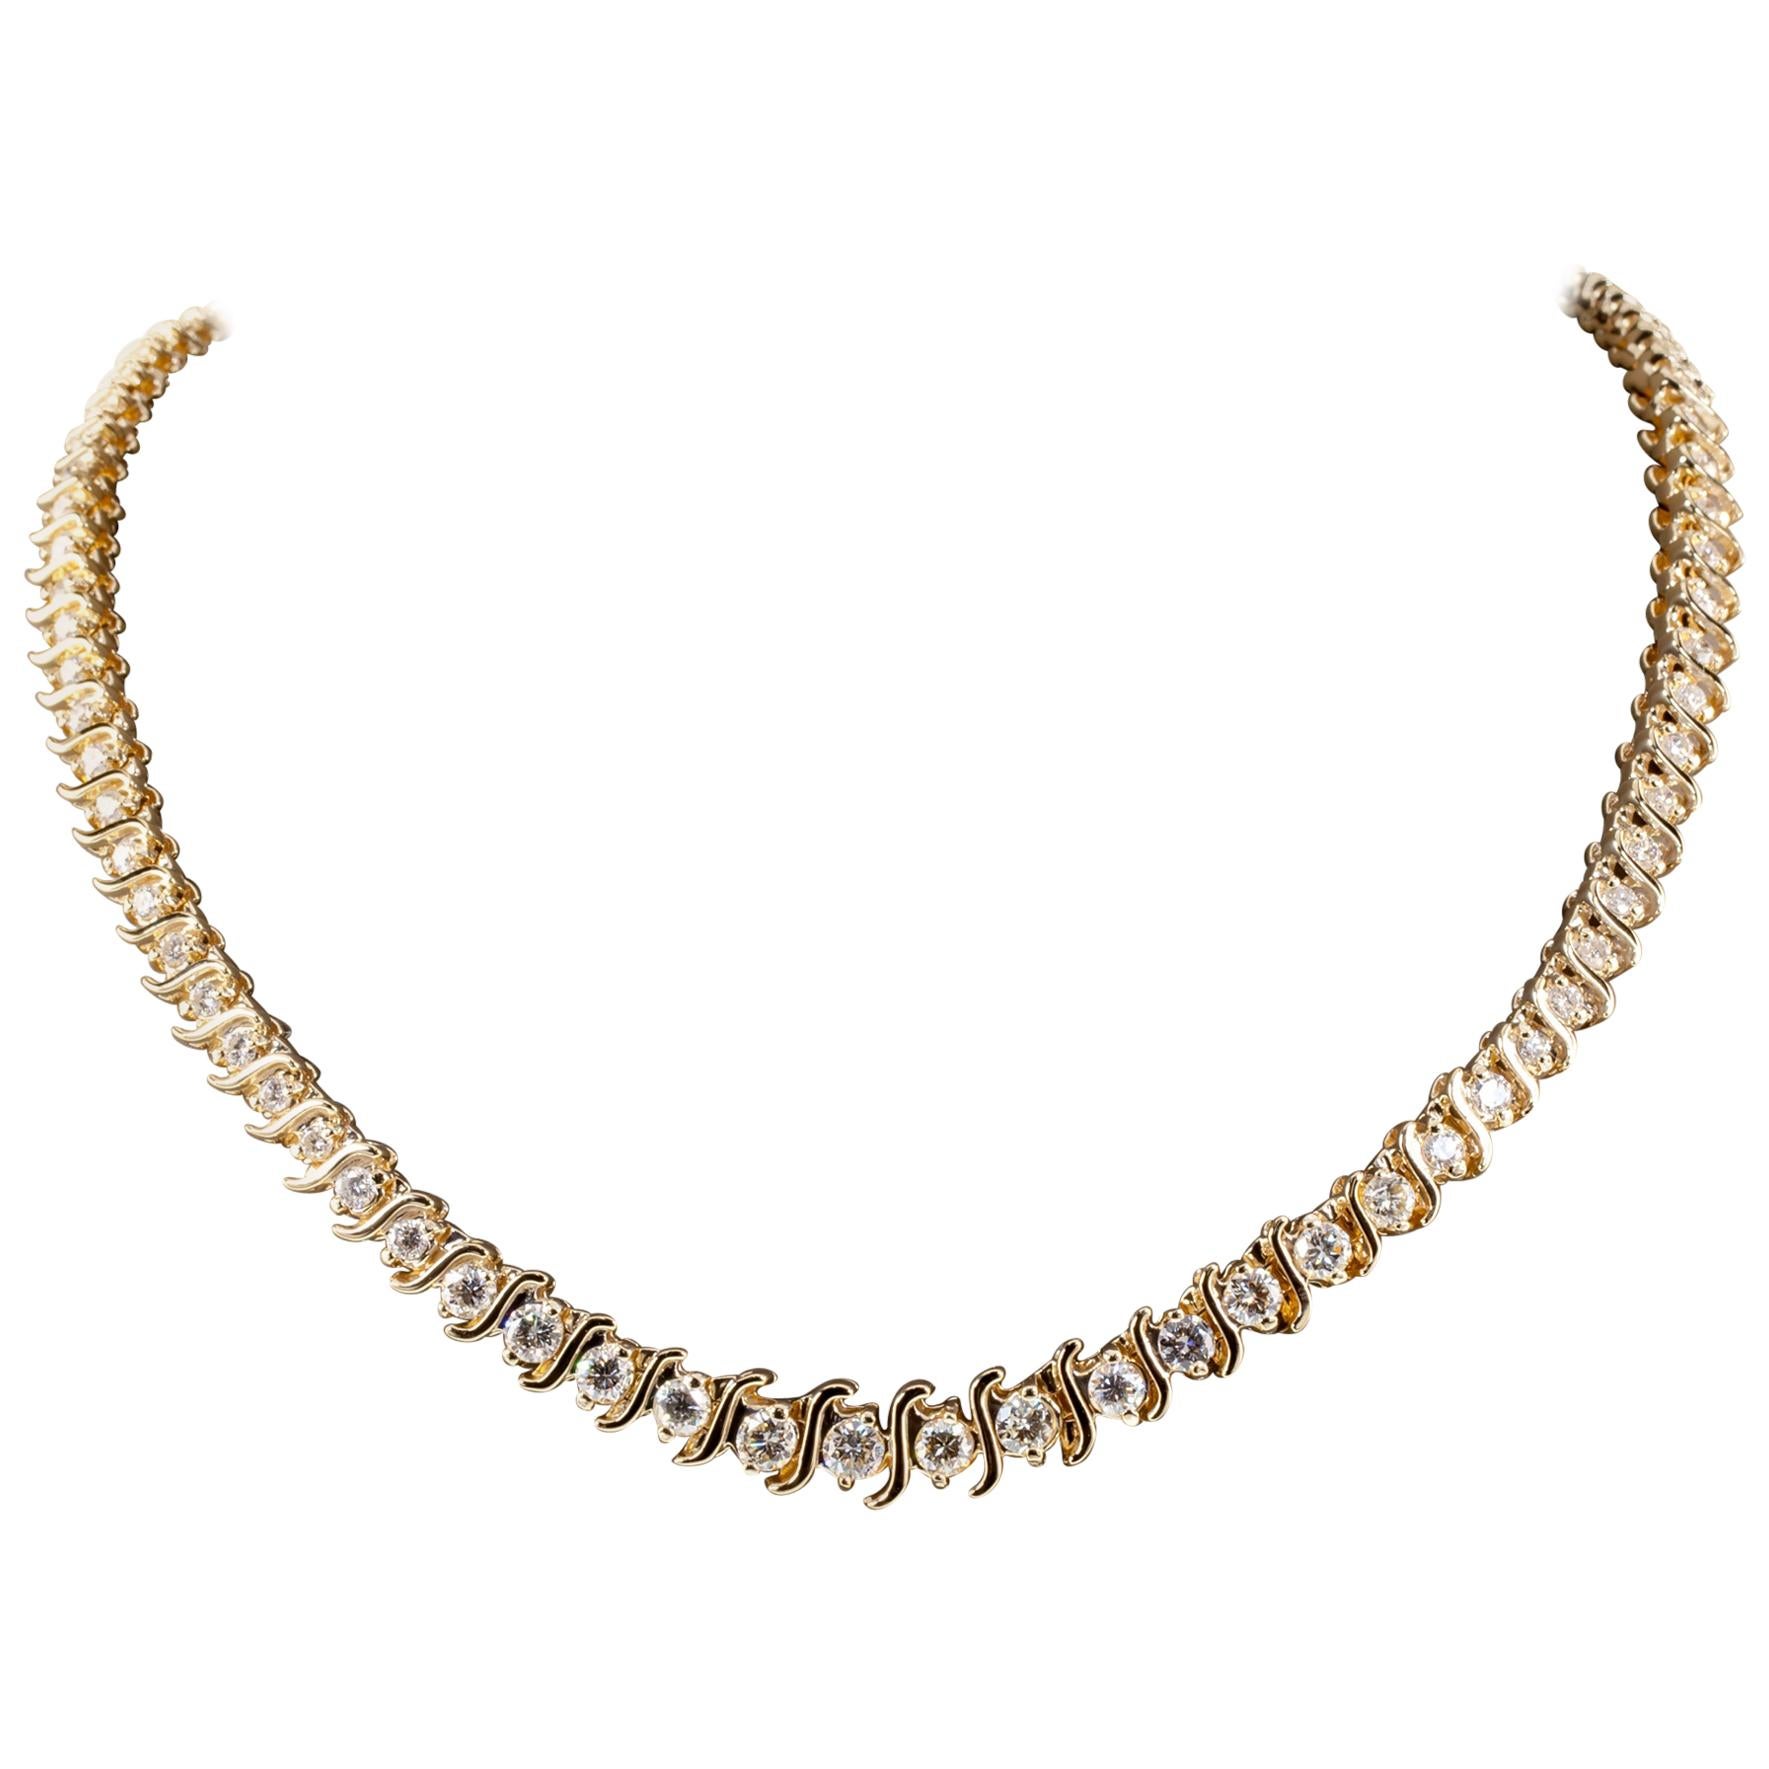 Gorgeous 6 Carat Round Diamond Tennis Necklace with S Links in Yellow Gold